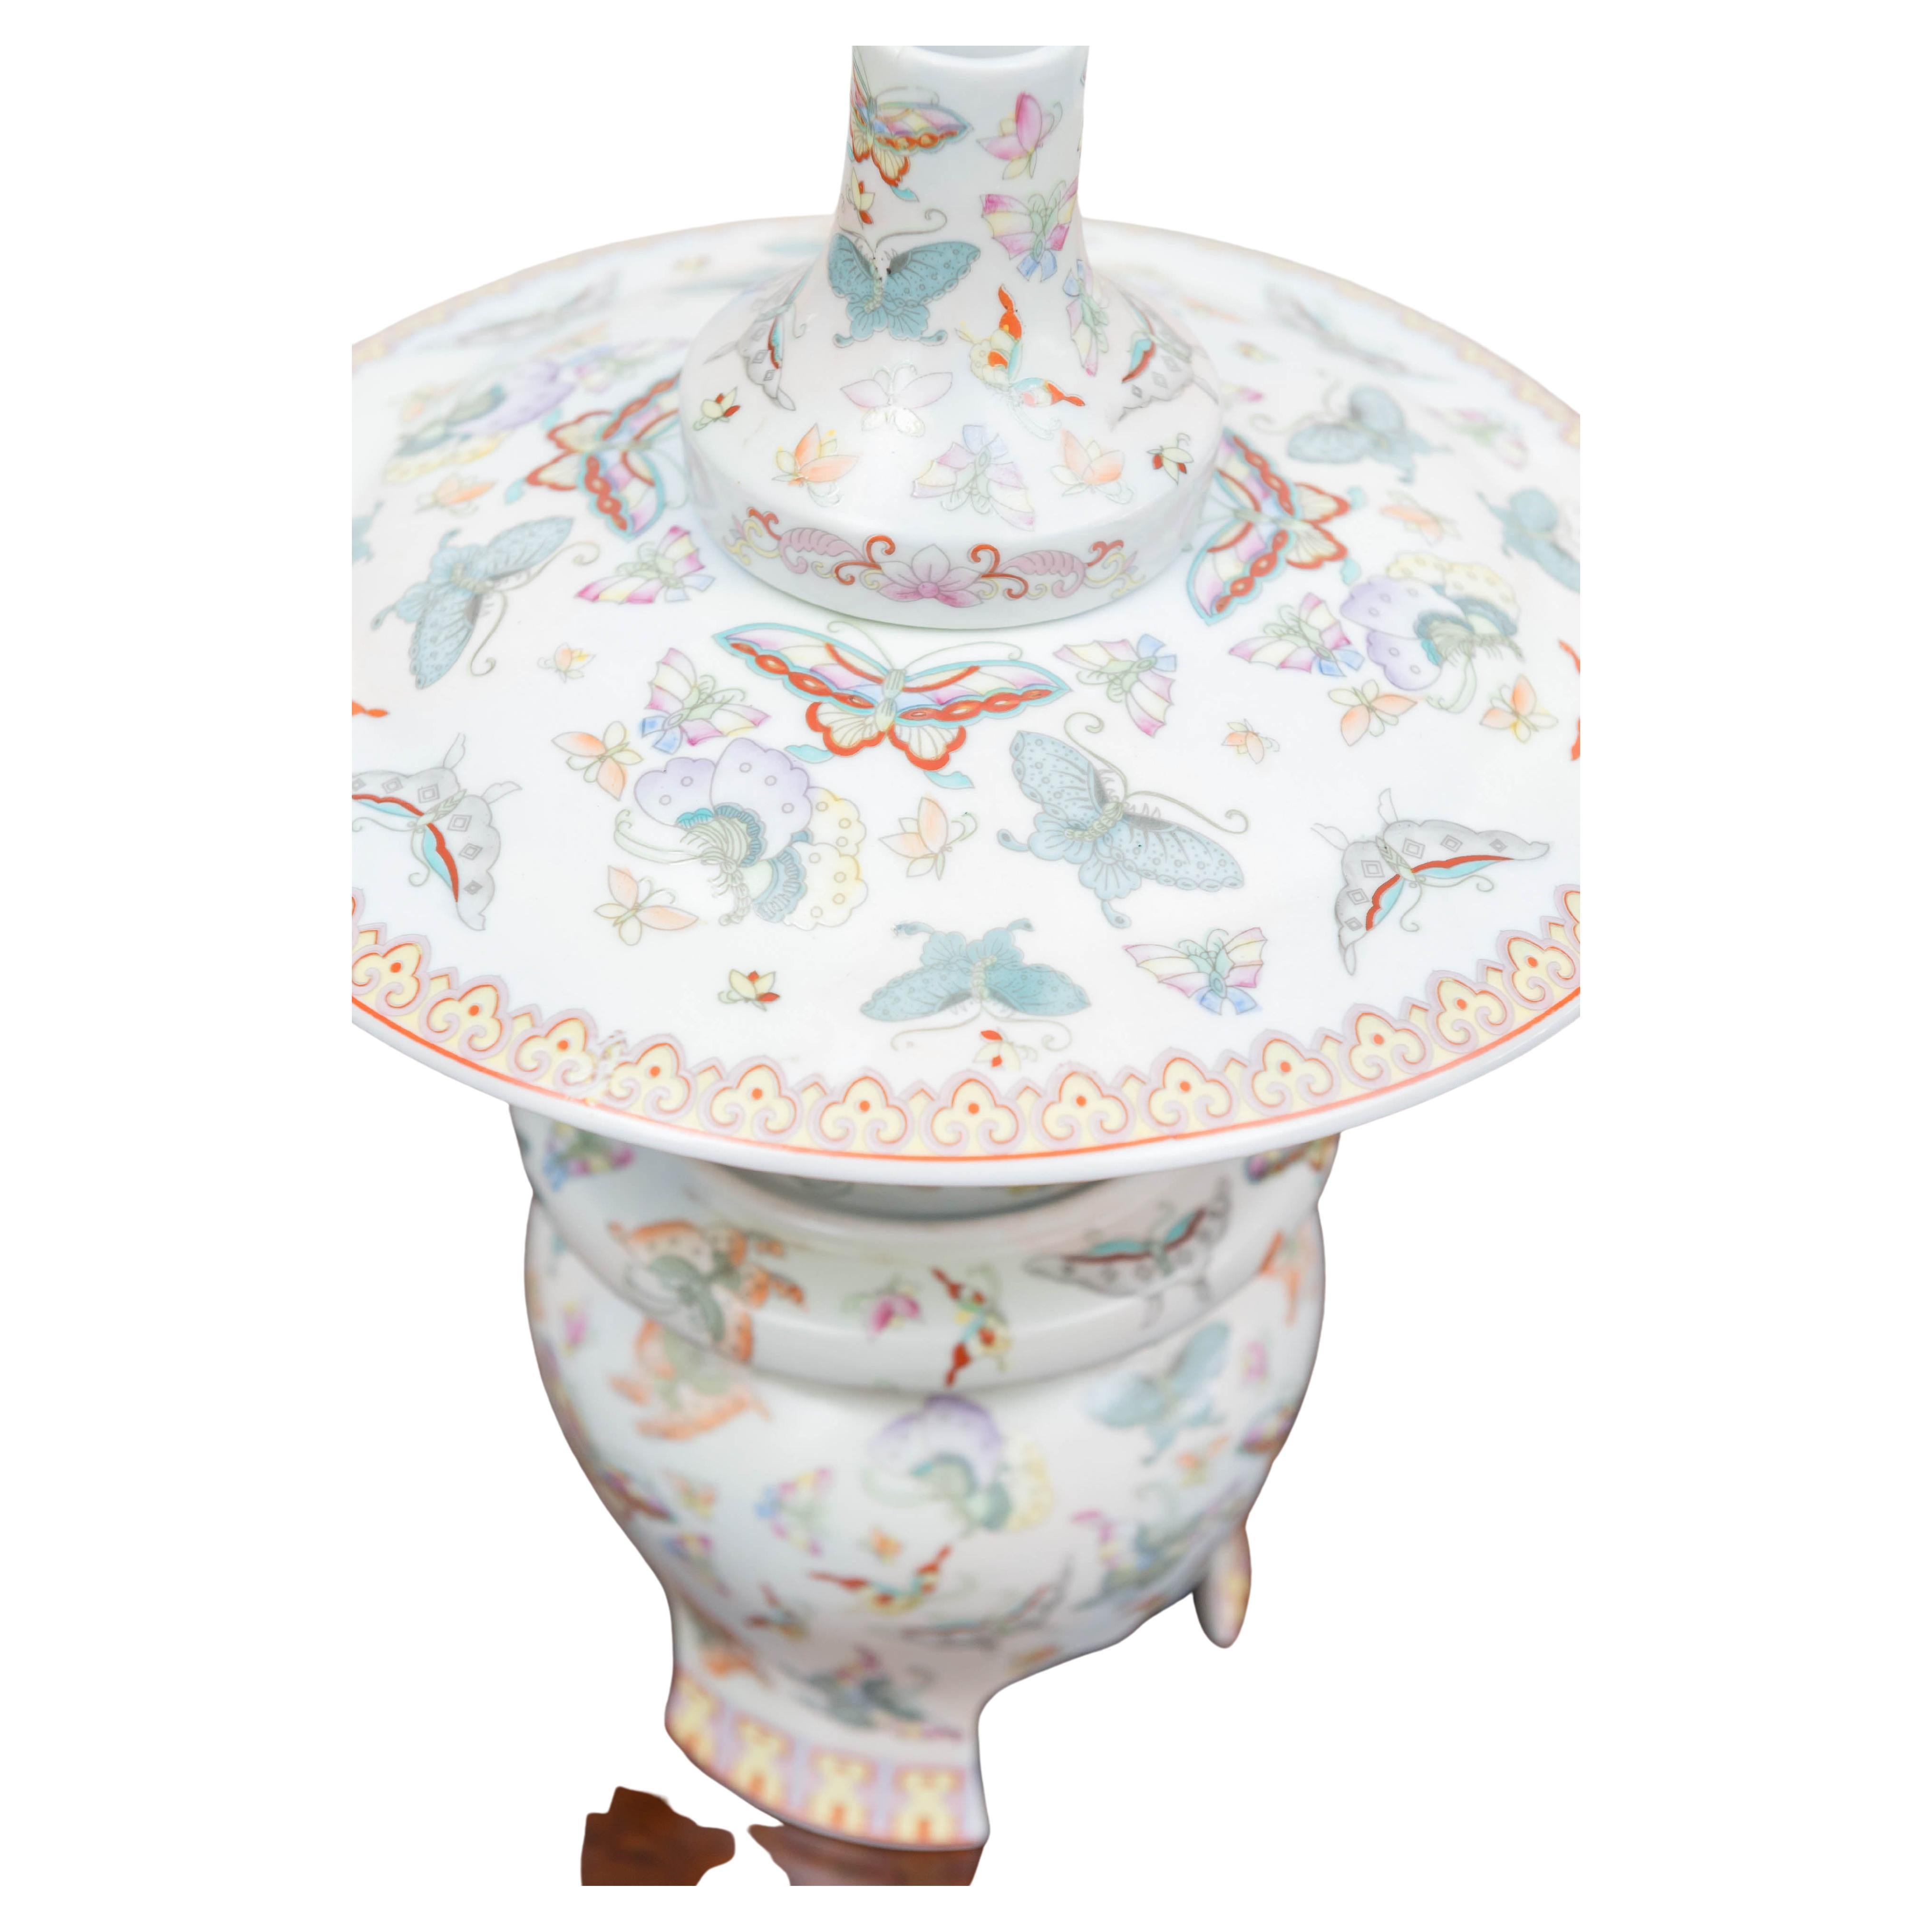 A 20th Century Chinese Porcelain Table Lantern (SINGLE ITEM) For Sale